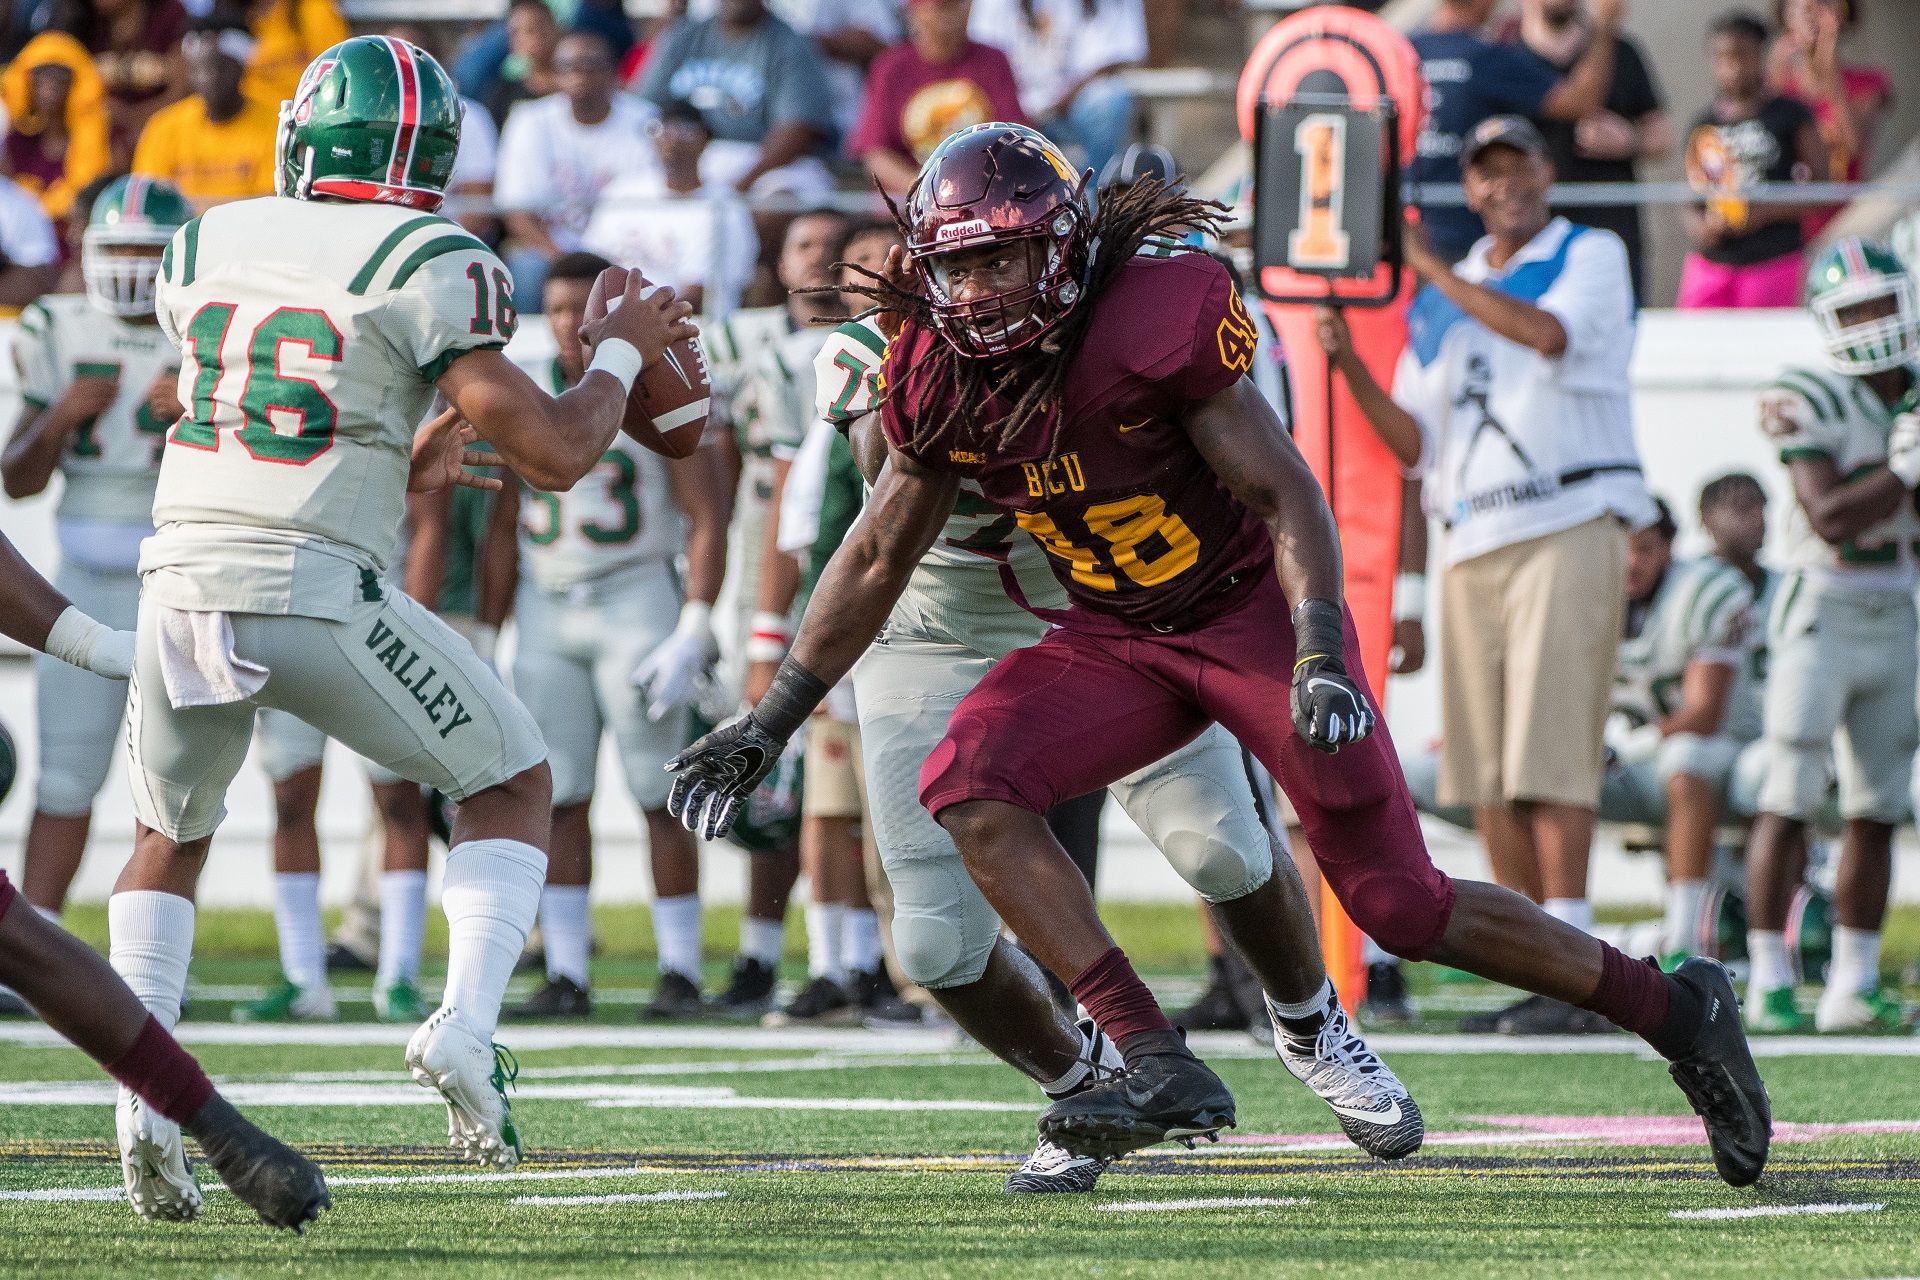 DE Marques Ford (Bethune-Cookman) Interview